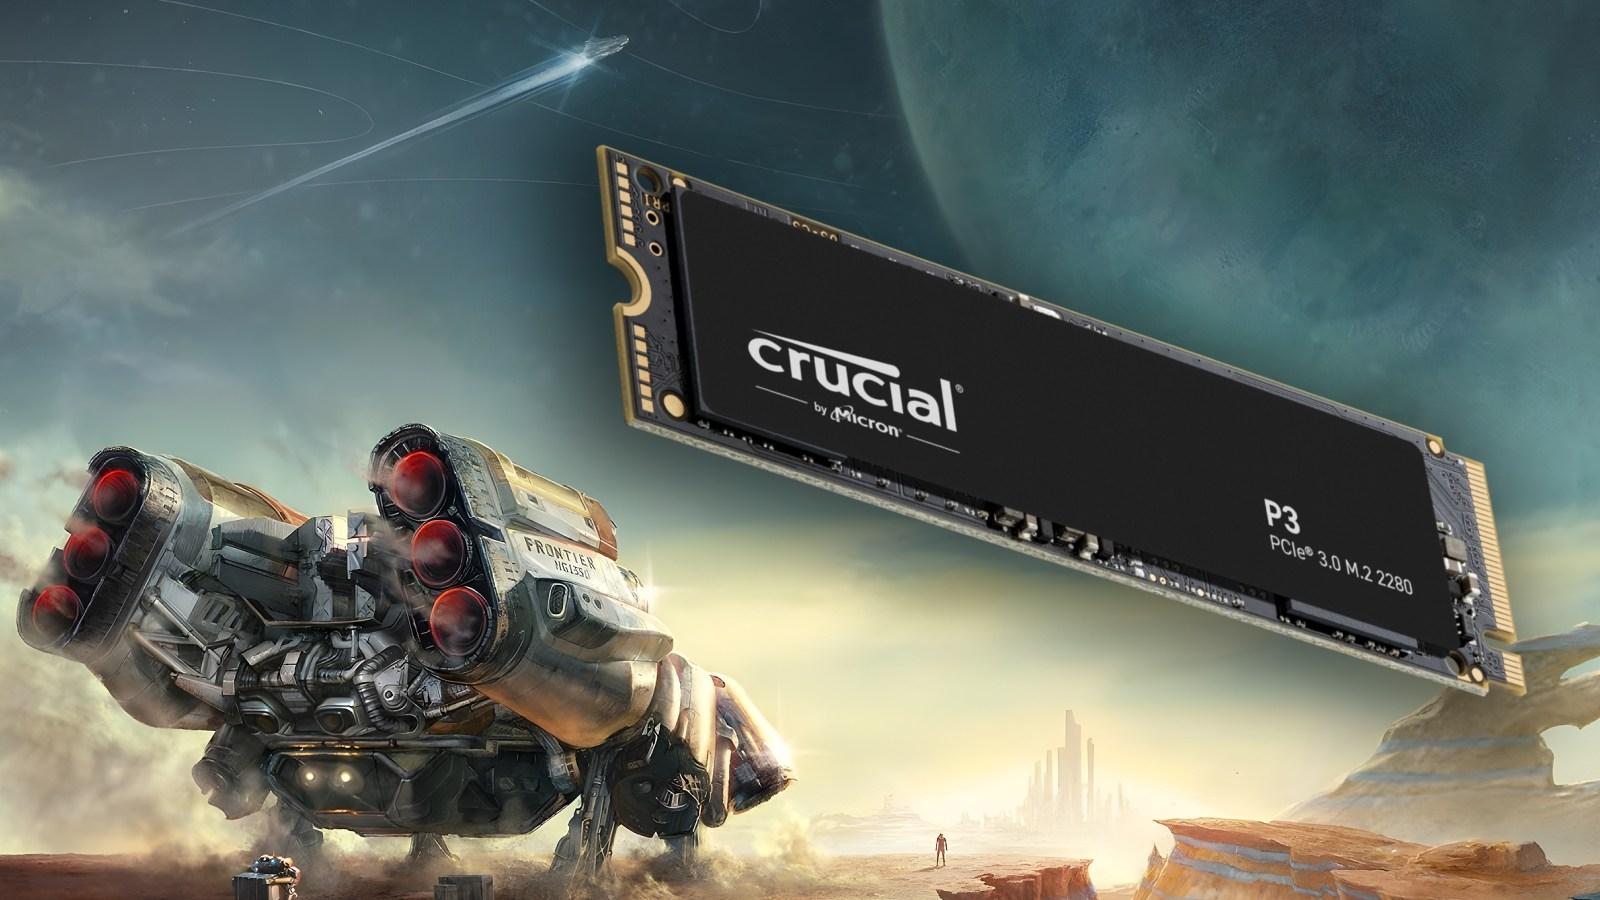 Starfield key art with NVMe SSD